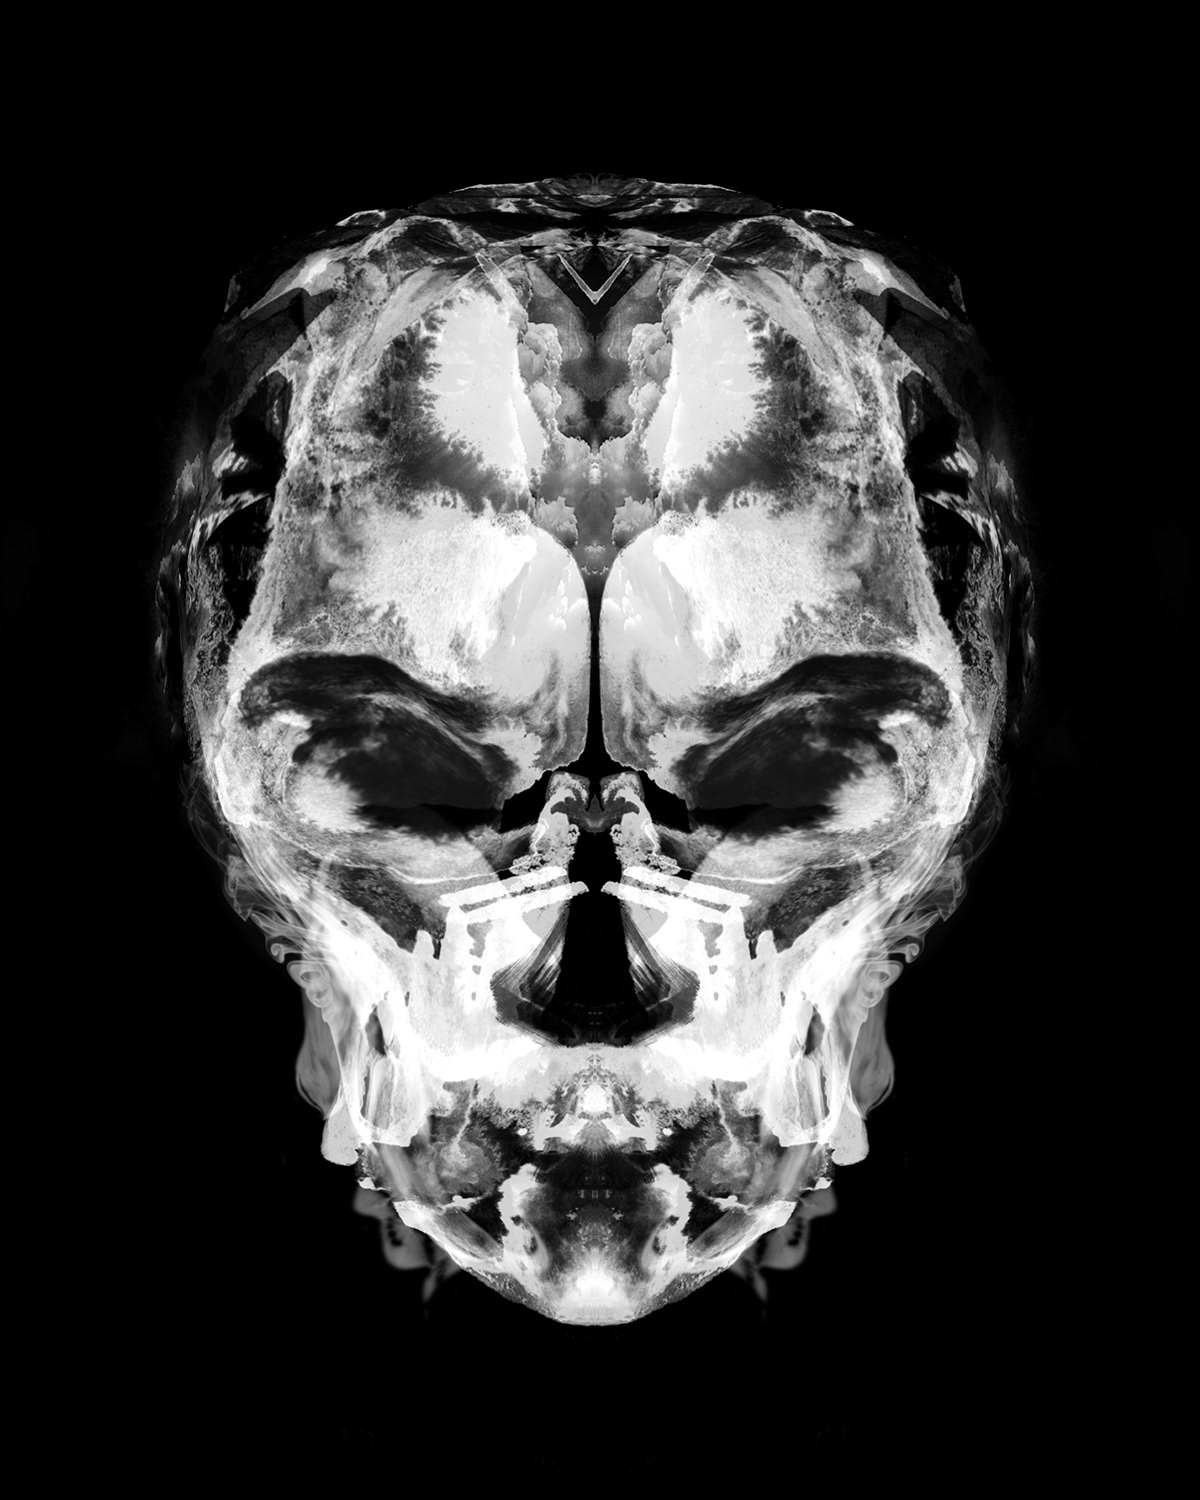 A mirrored x-ray skull of an ape. This face is apart of the Animus inkblot test series.